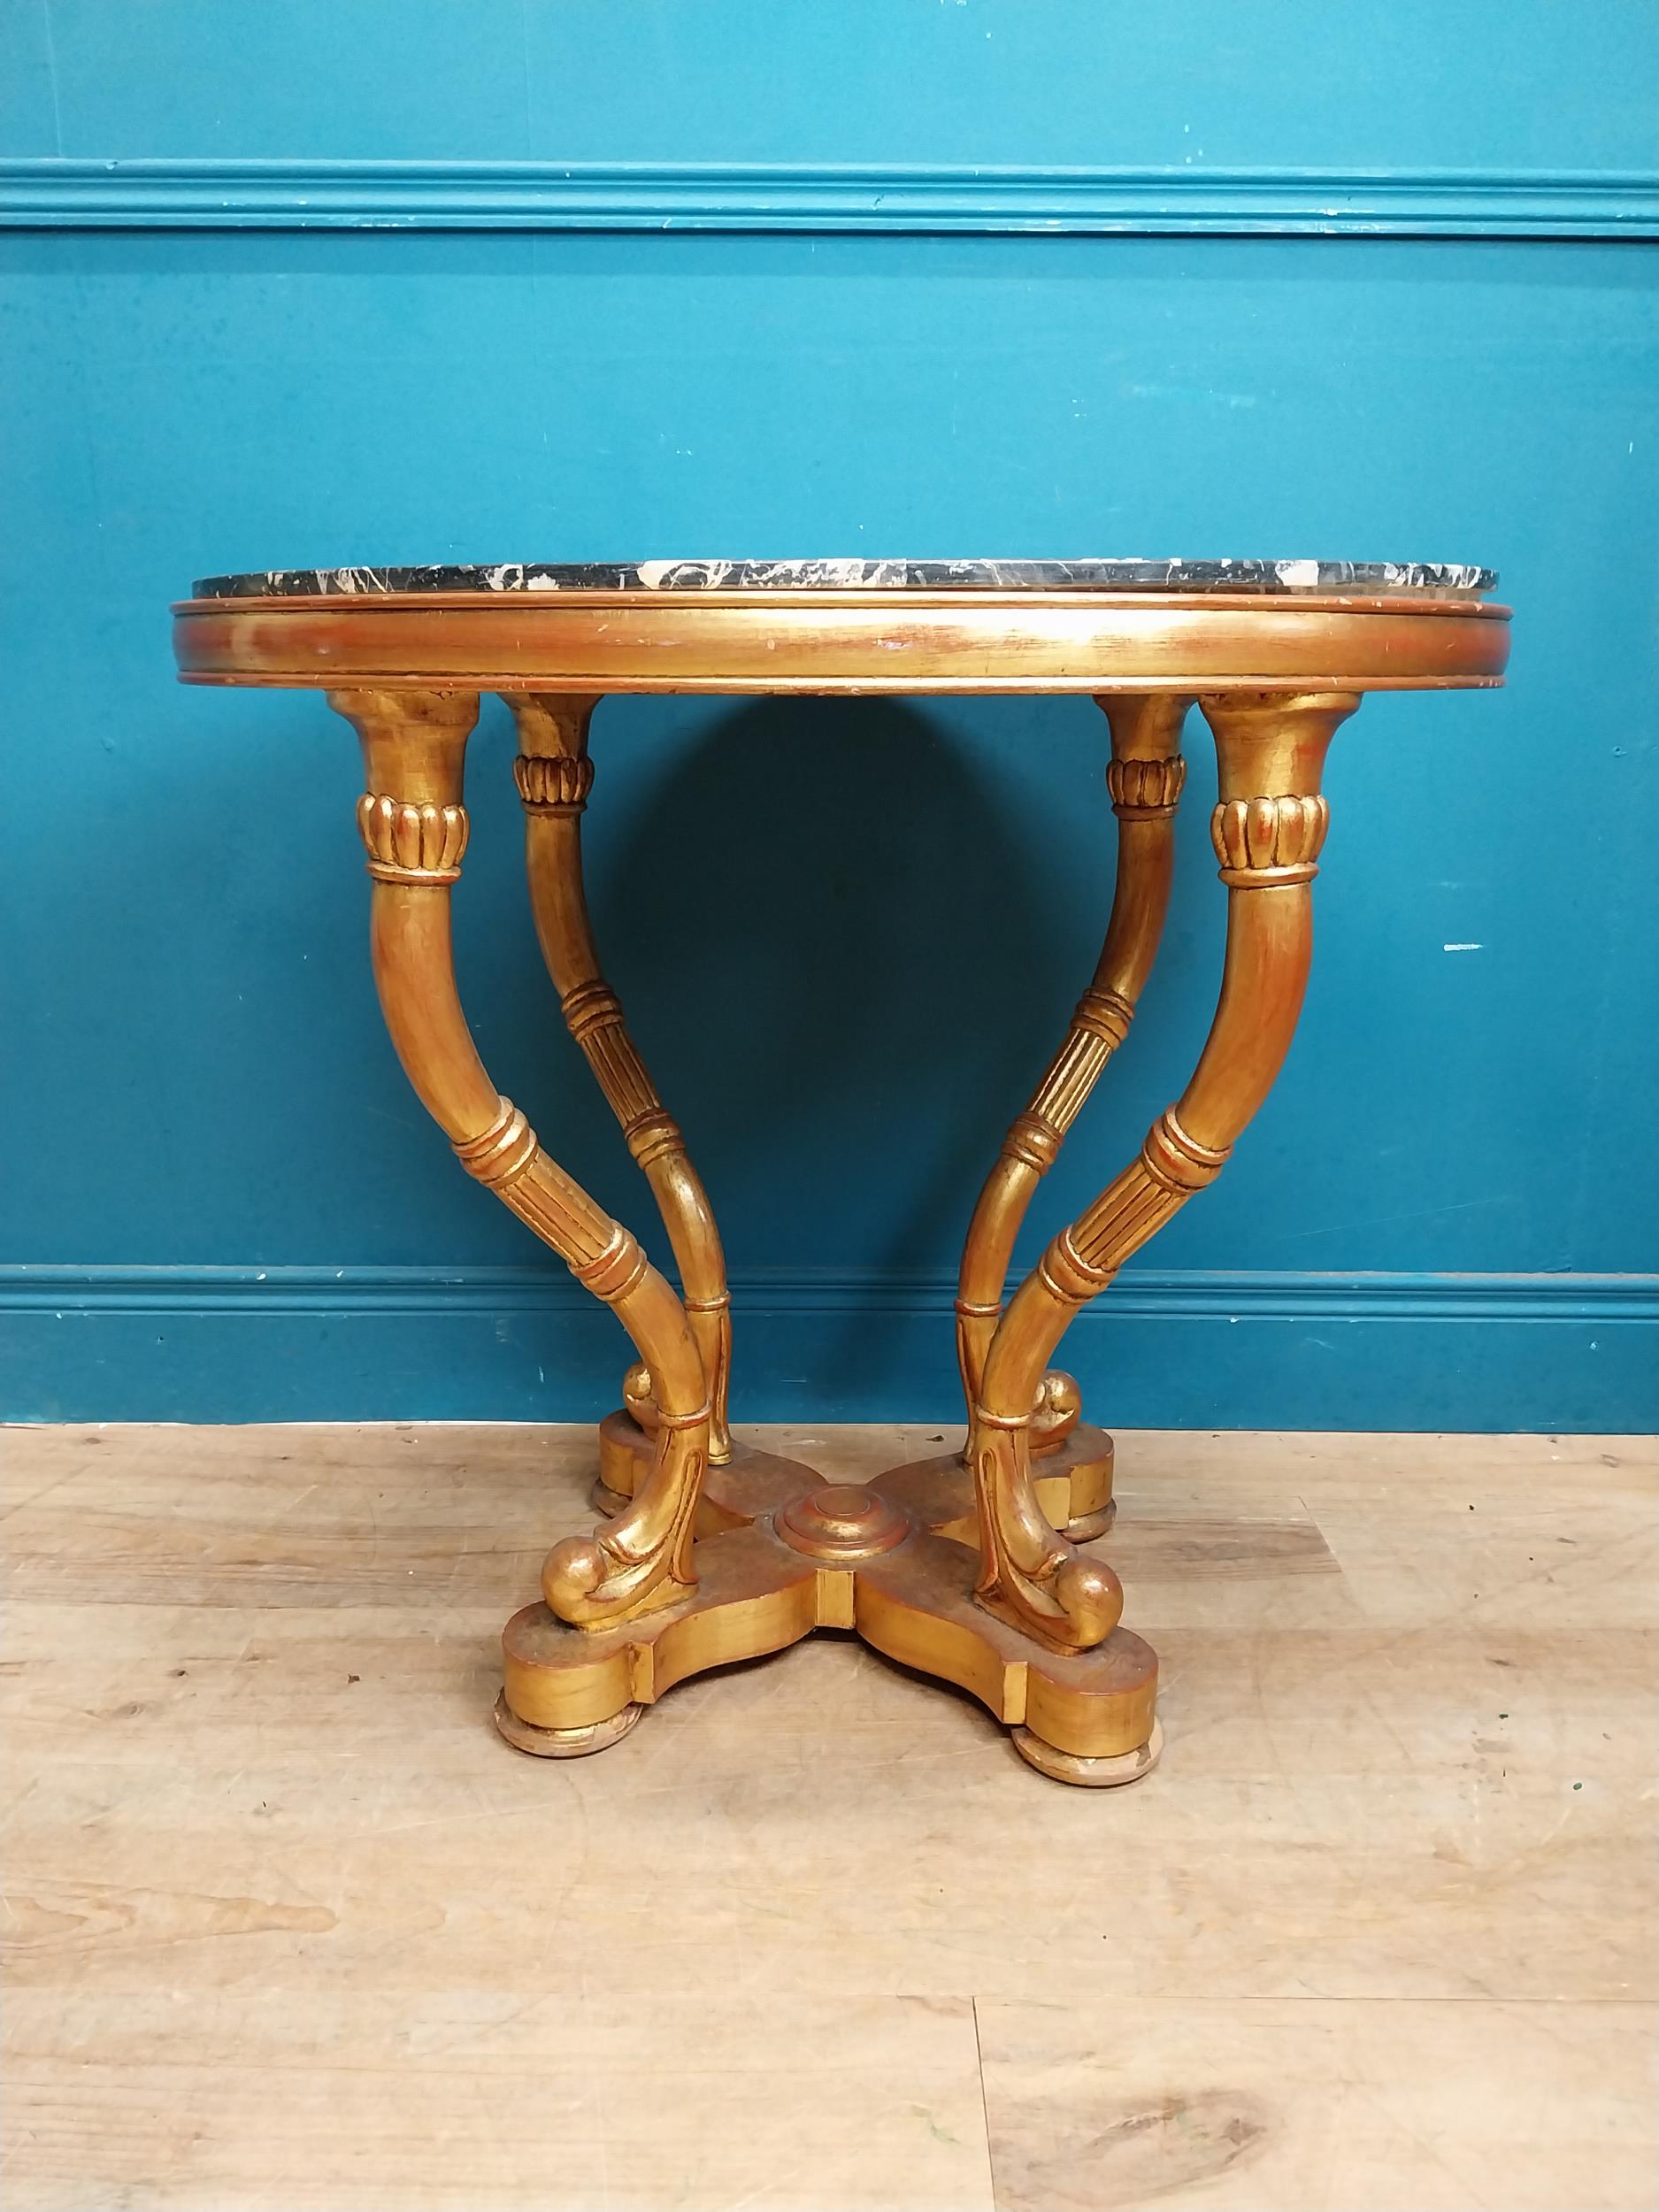 Decorative giltwood centre table with marble top raised on four shaped legs and x-frame platform